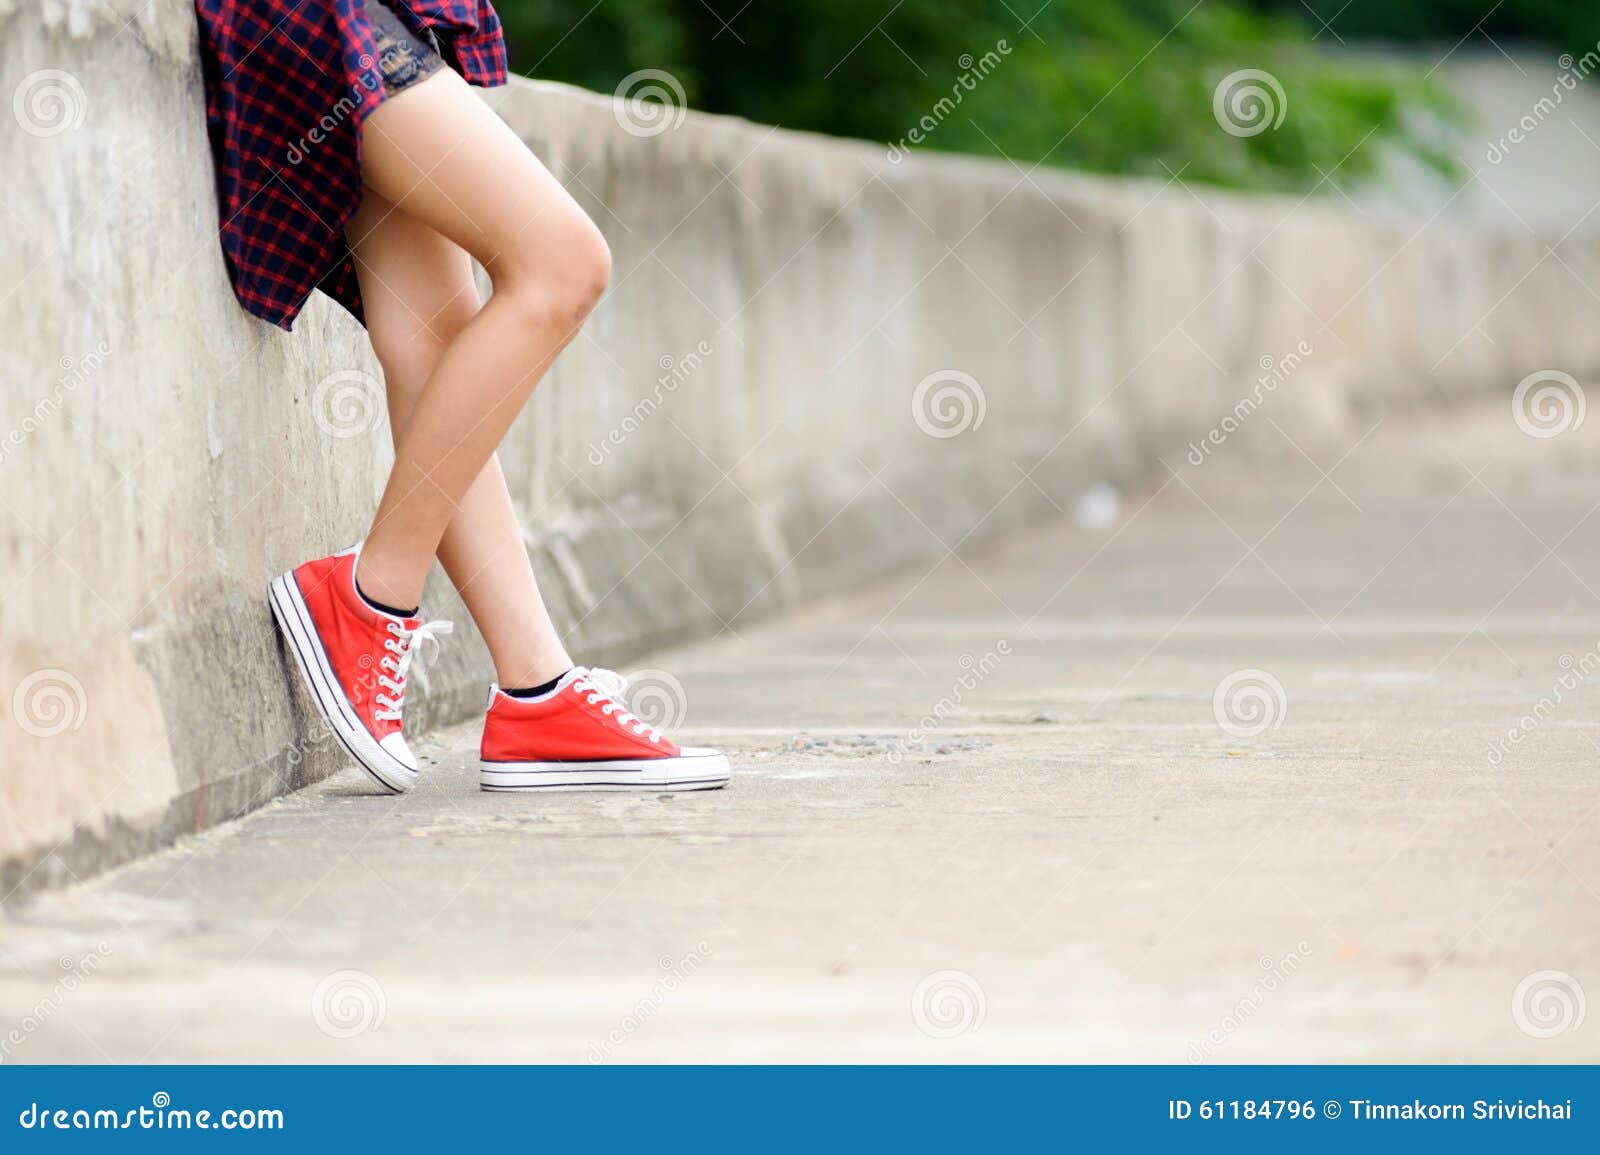 Focus on girl in red shoe stock photo. Image of girl - 61184796